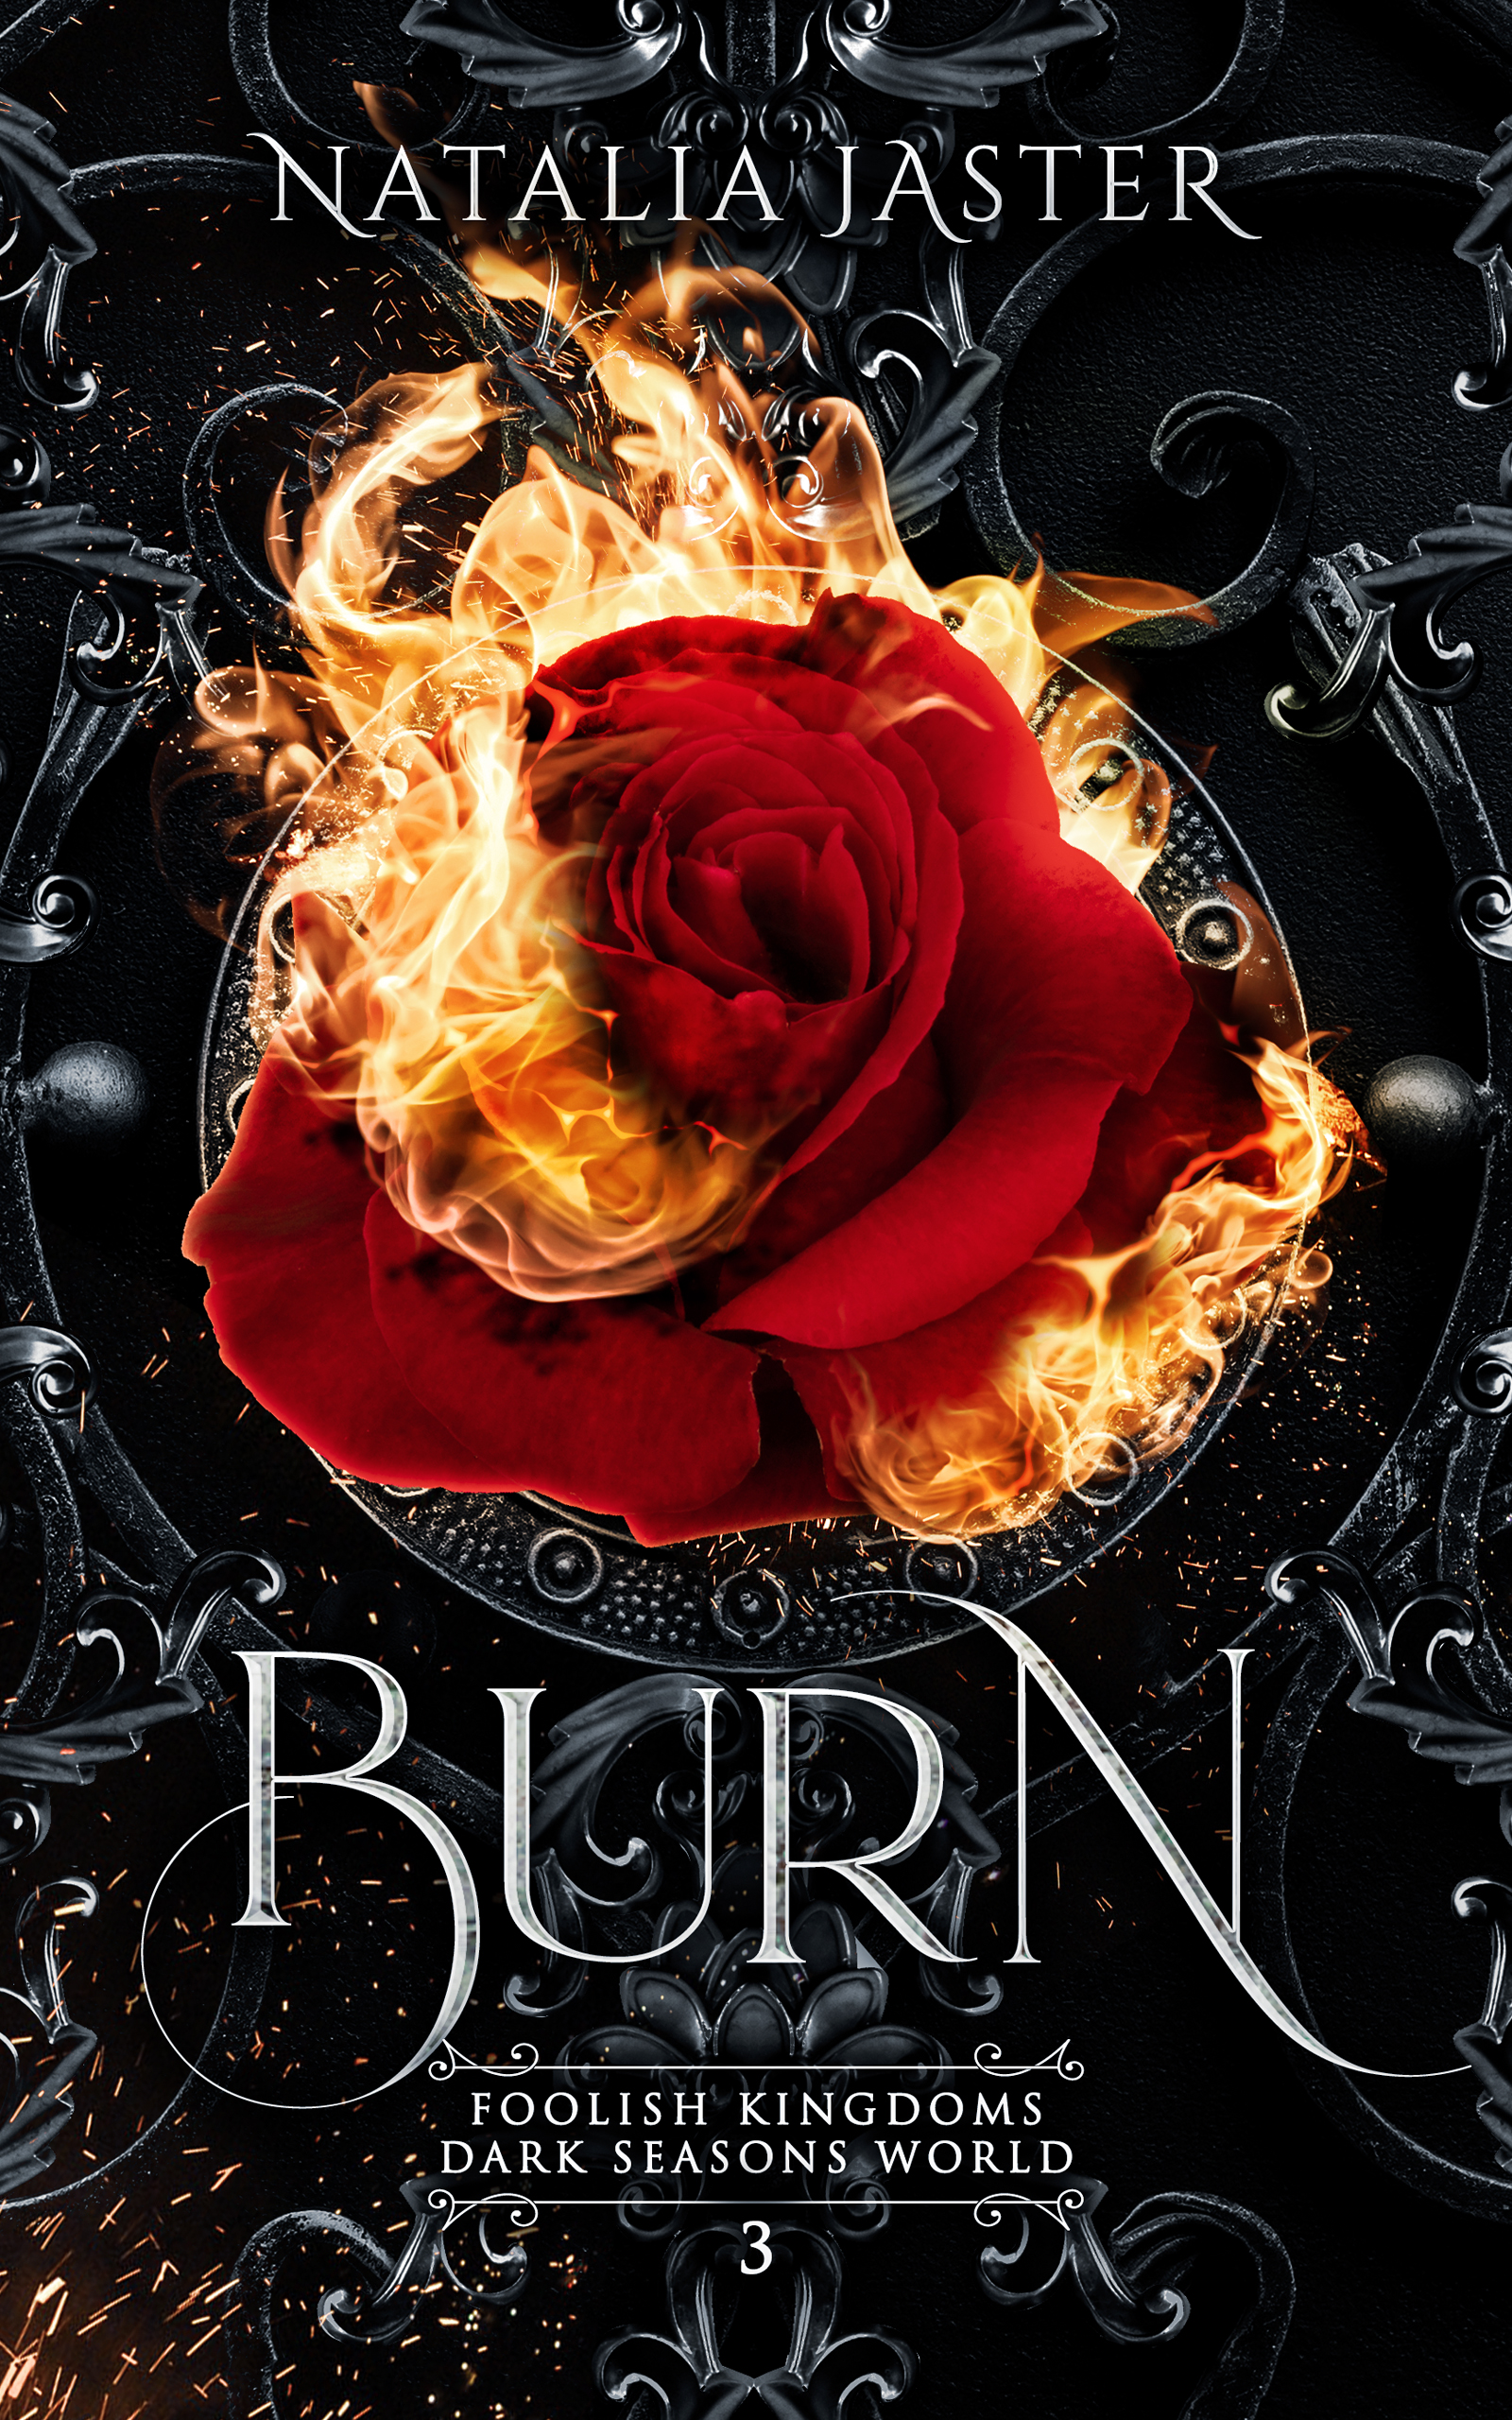 Cover of Burn, a novel by Natalia Jaster in the Foolish Kingdom Series